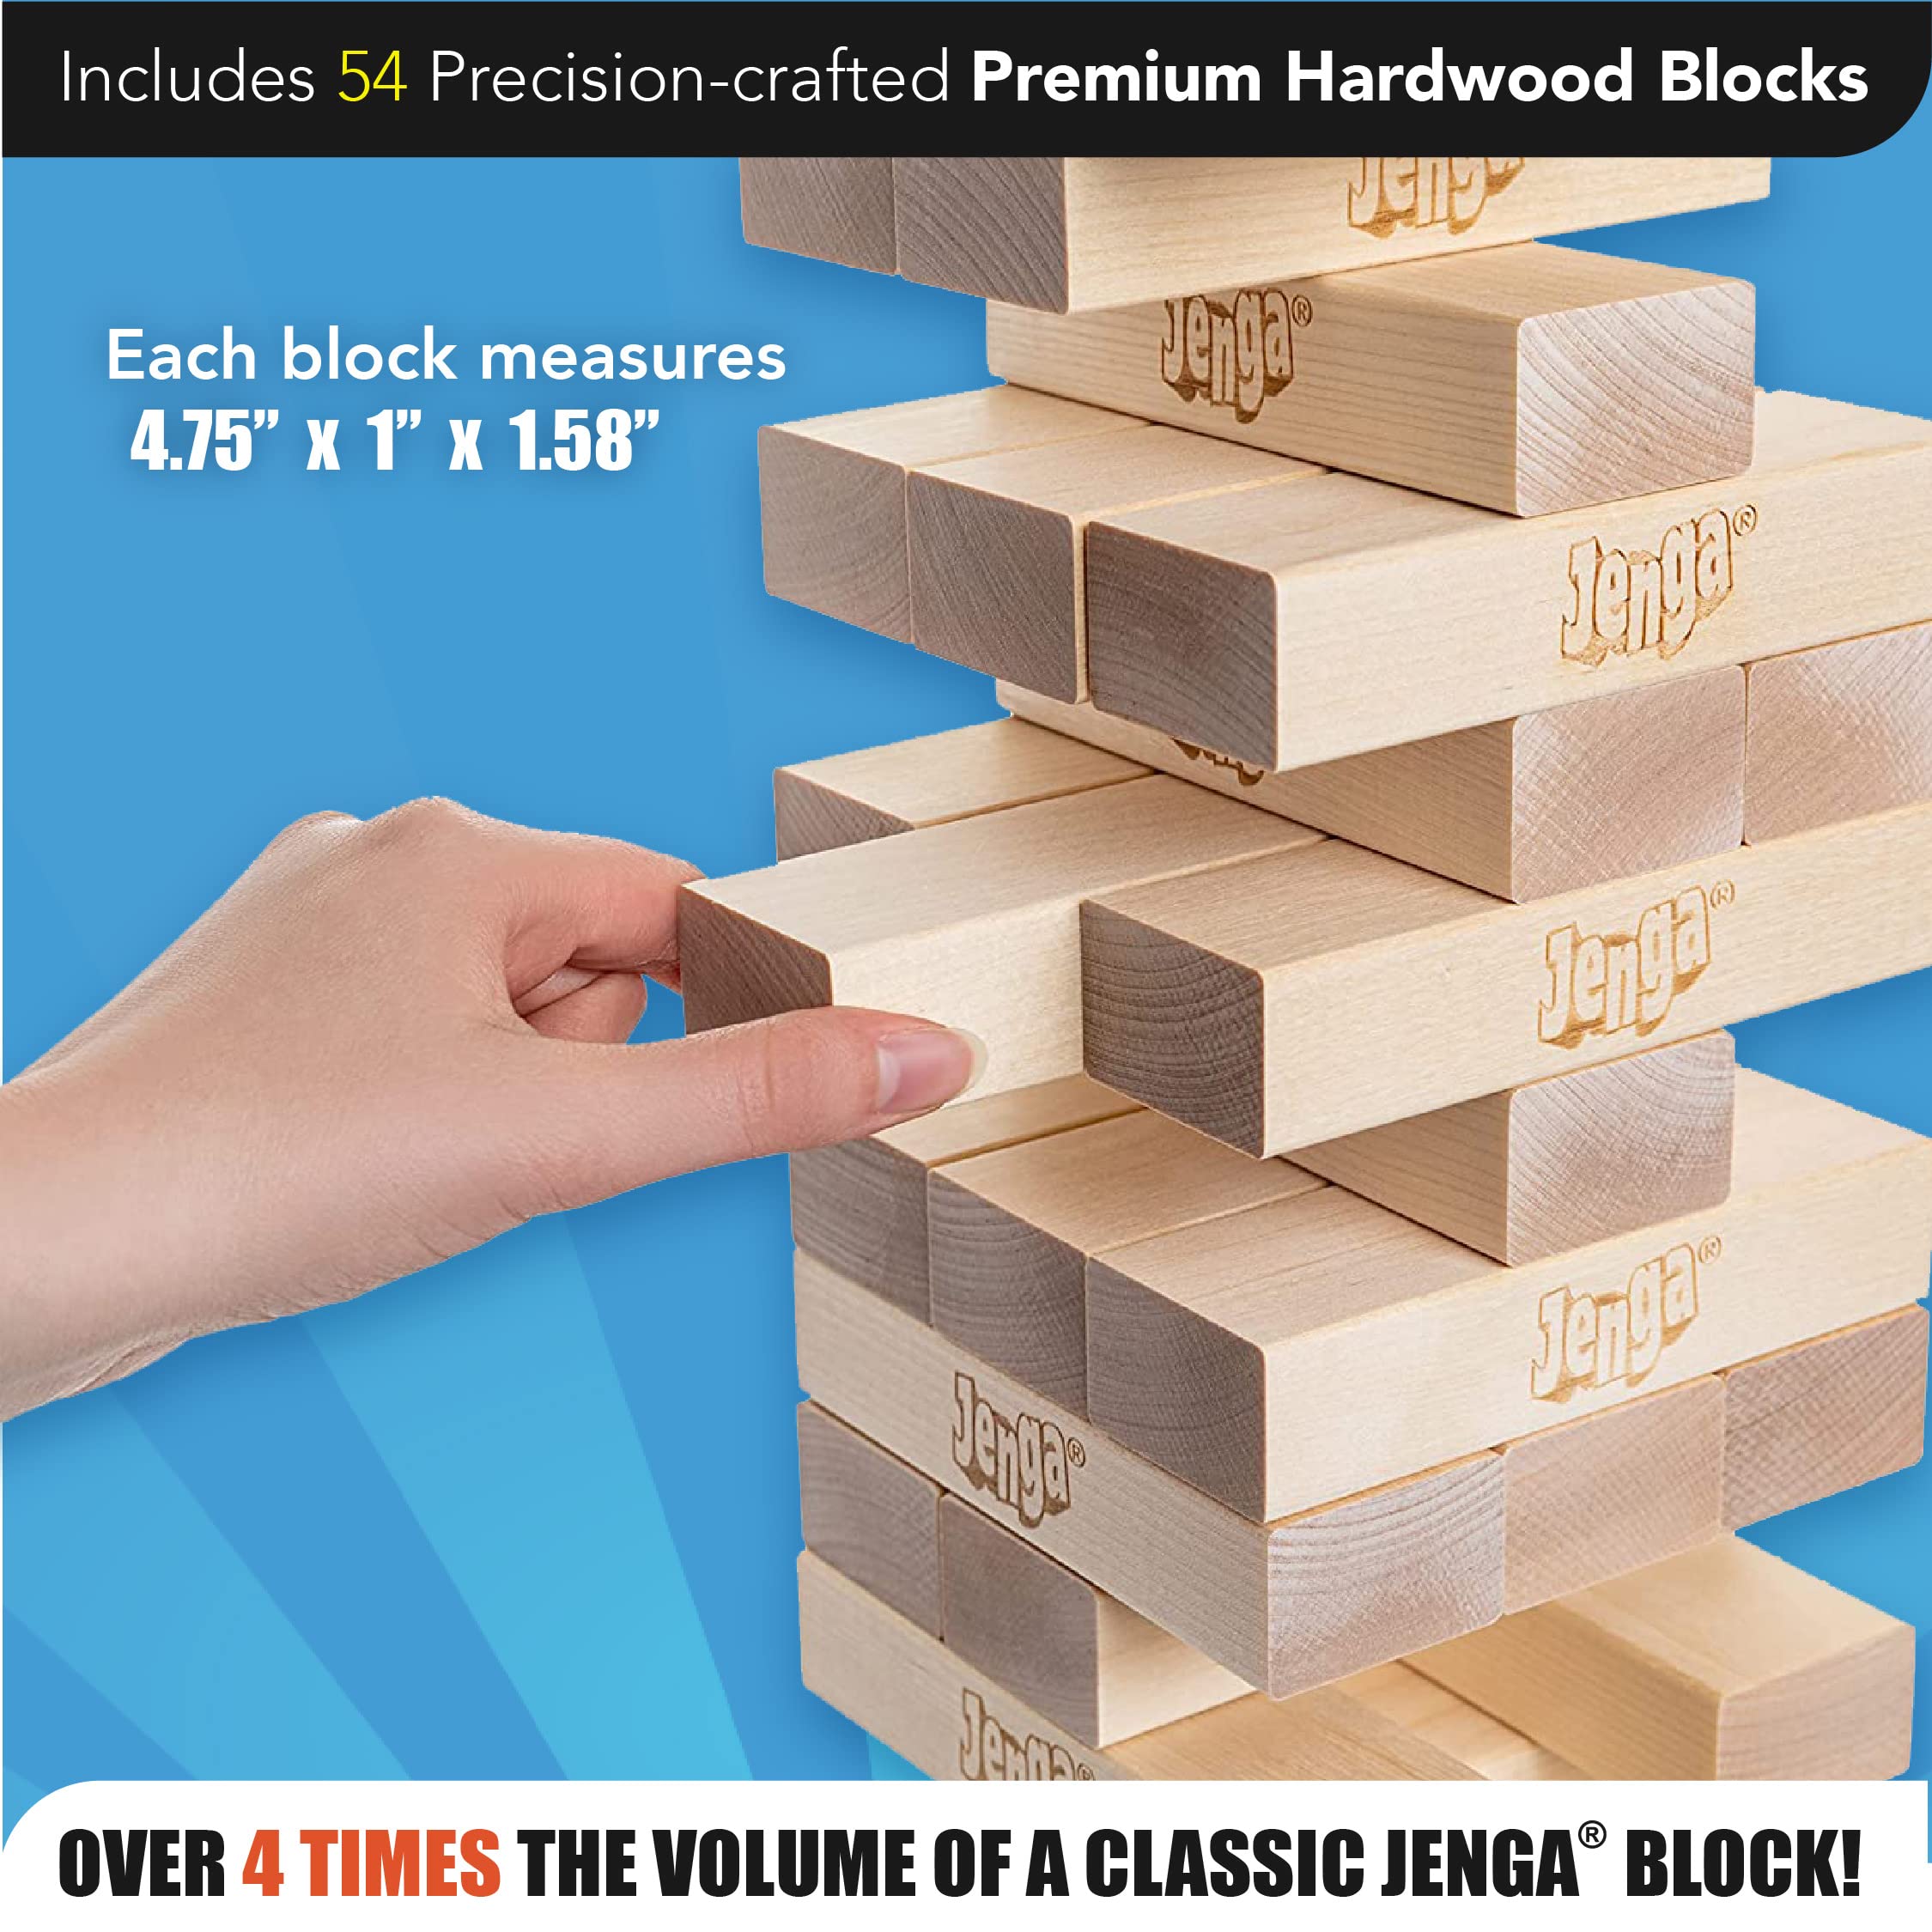 Jenga Official Giant JS4 - Oversized Stacks to Over 3 Feet in Play, Includes Heavy-Duty Carry Bag, Premium Splinter Resistant Hardwood Blocks, Precision-Crafted Trusted Brand Game